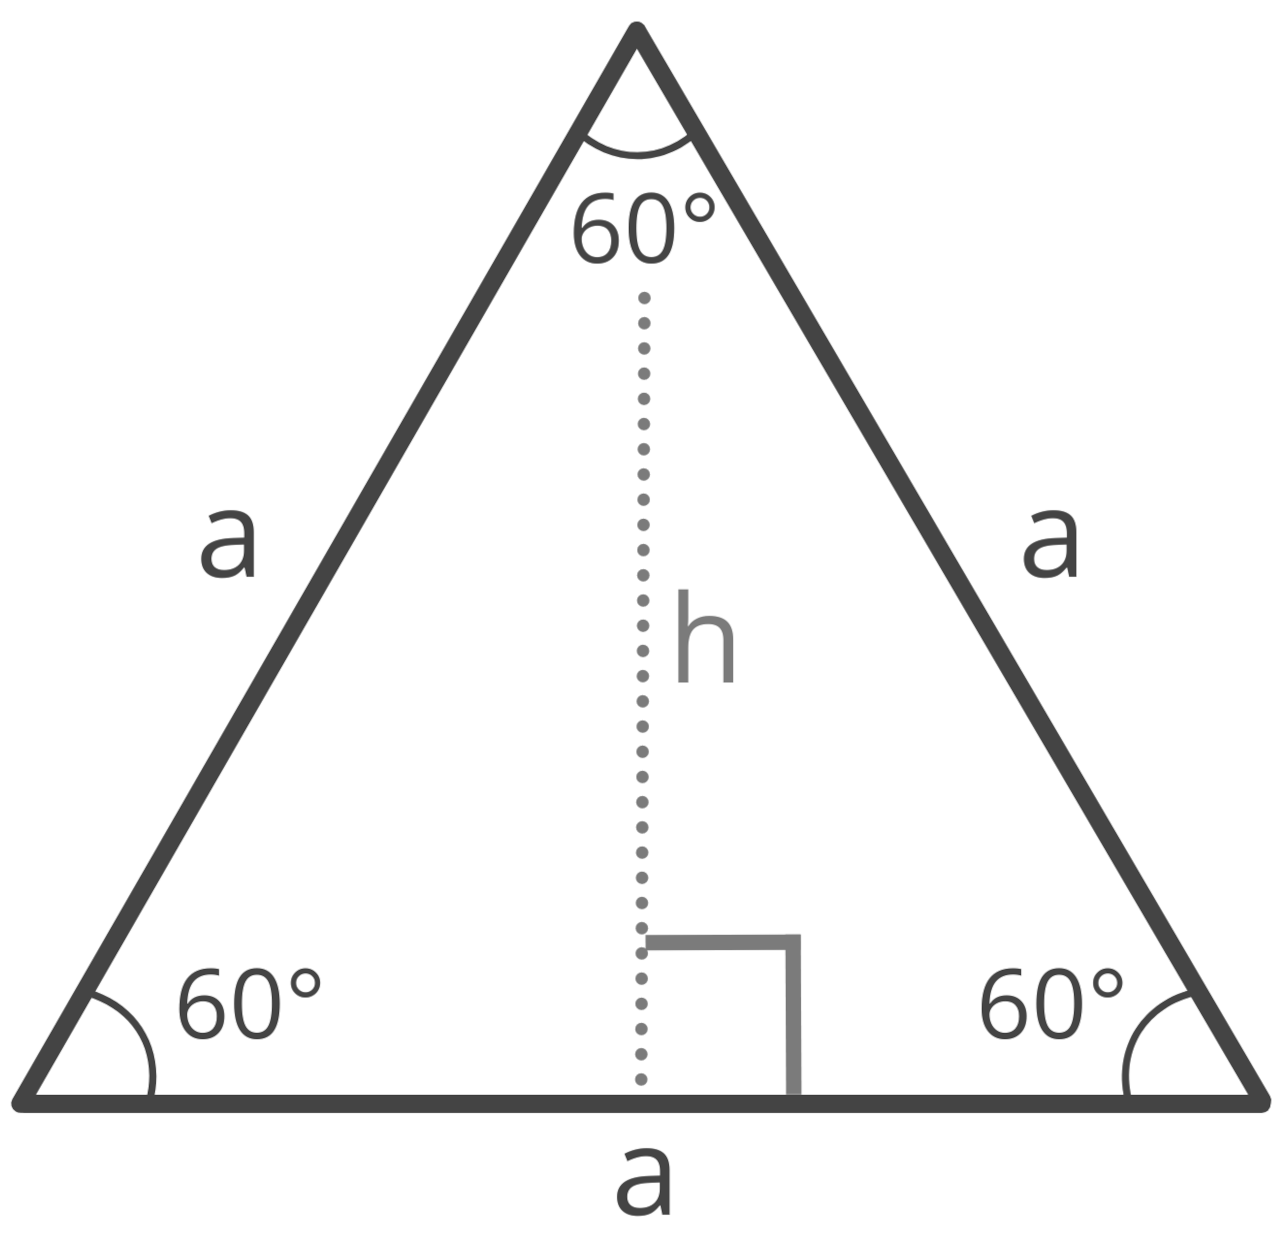 How to Find the Height of a Triangle (Right, Equilateral, Isosceles)